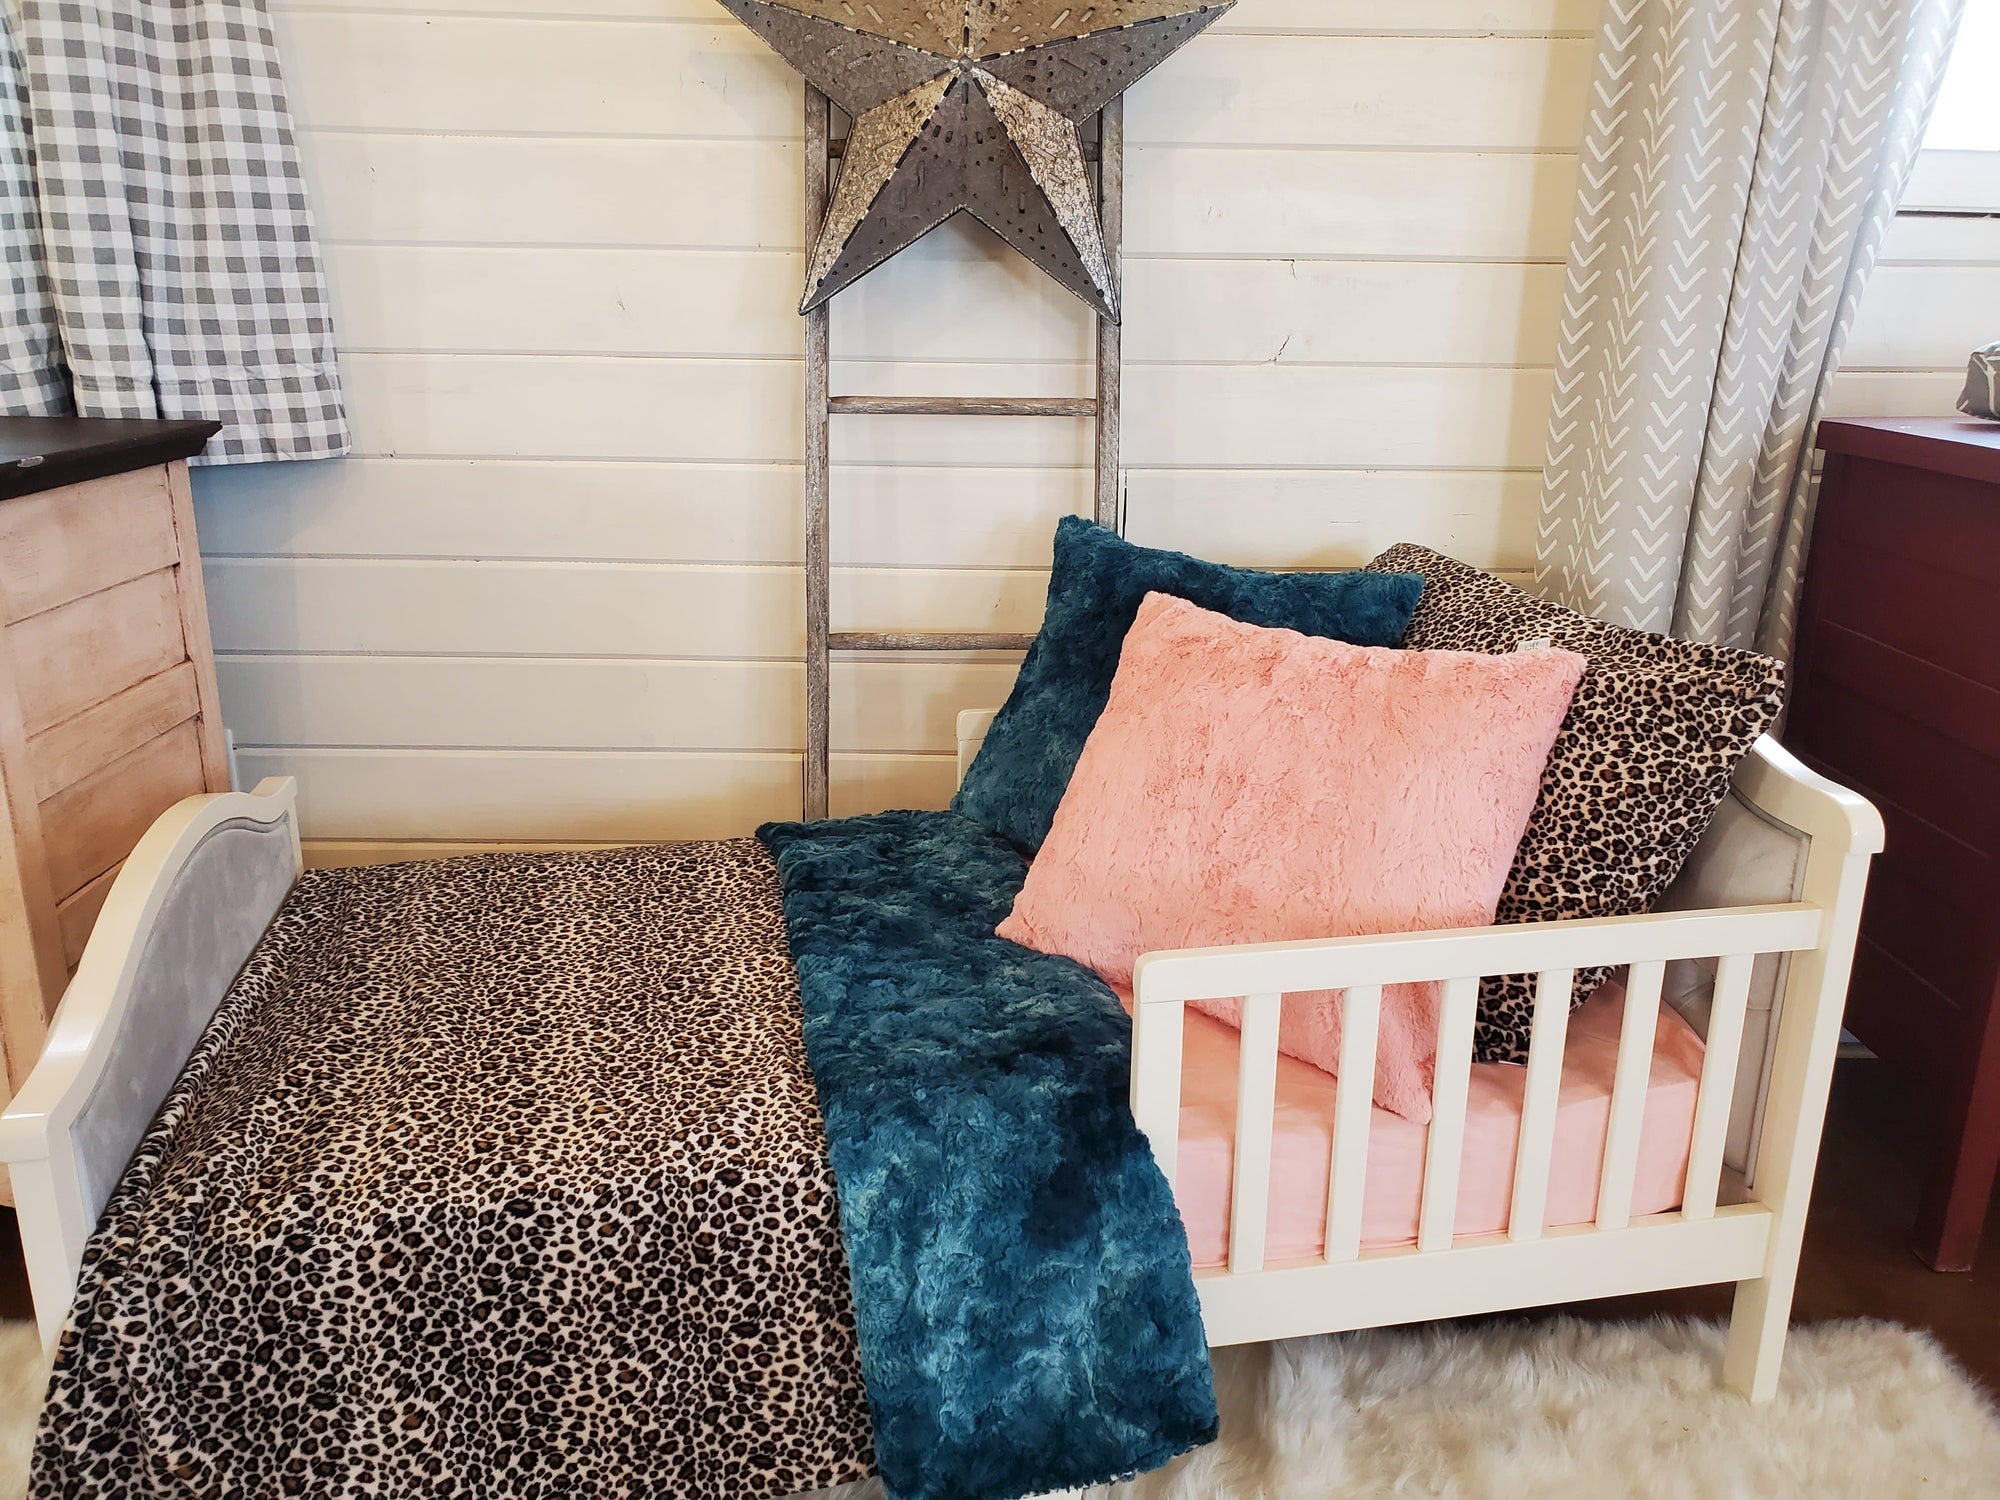 Toddler or Twin Bedding -  Cheetah Minky and Mallard Galaxy Minky Collection - DBC Baby Bedding Co 